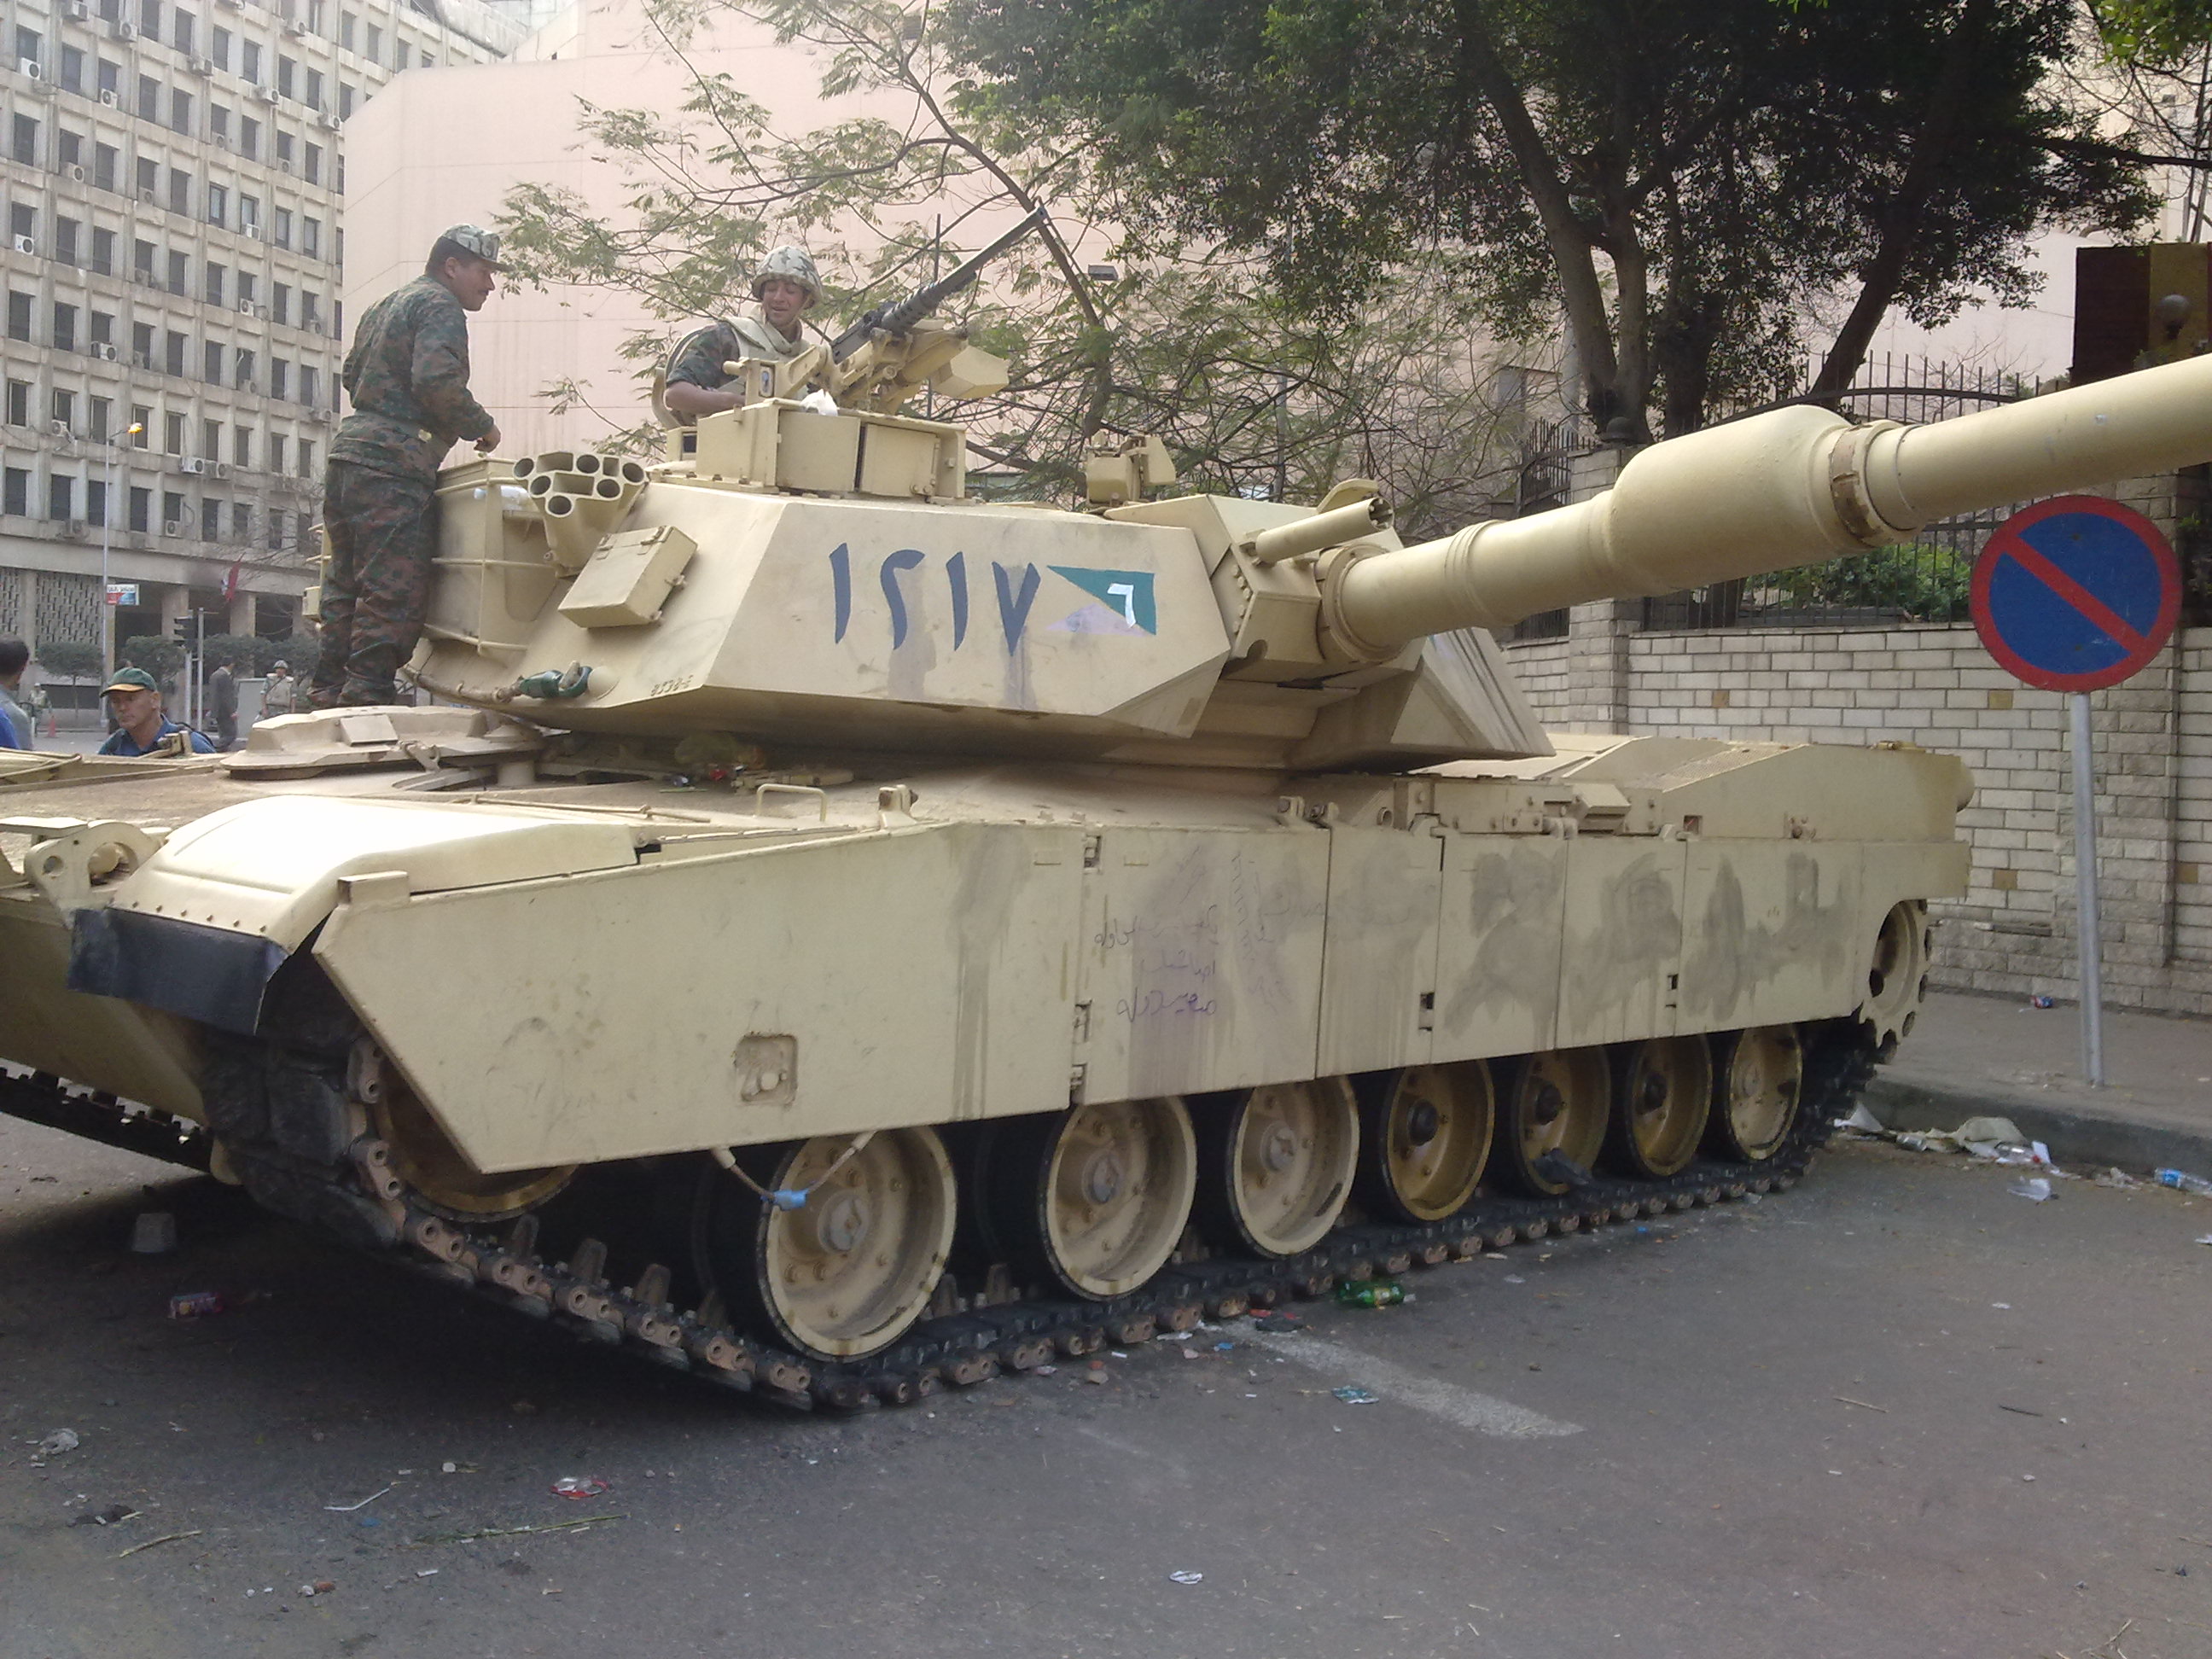 Egyptian_Tank_in_the_streets_of_Cairo_February_2011.jpg